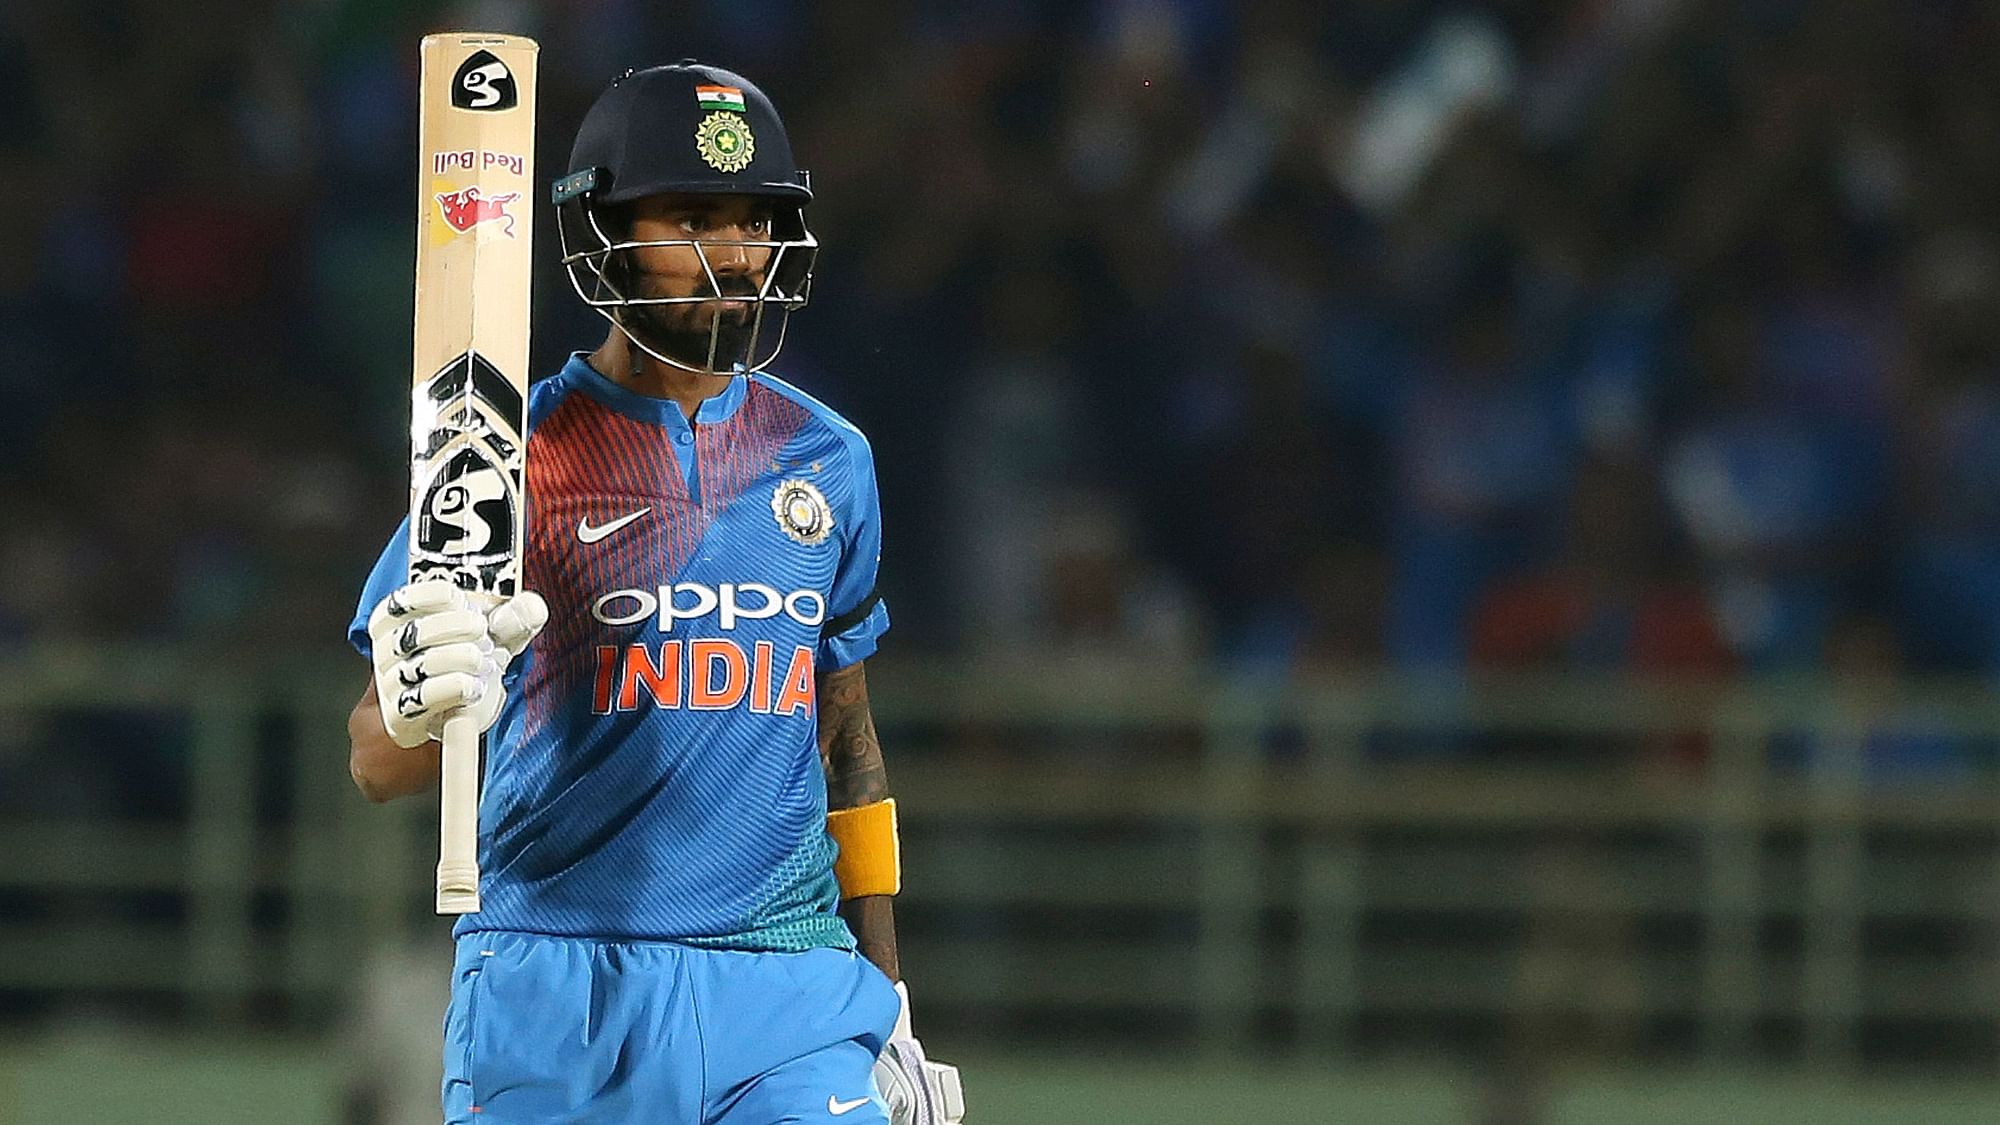 KL Rahul hit a 36-ball 50 in what was his first outing for India since the ‘Koffee With Karan’ controversy.